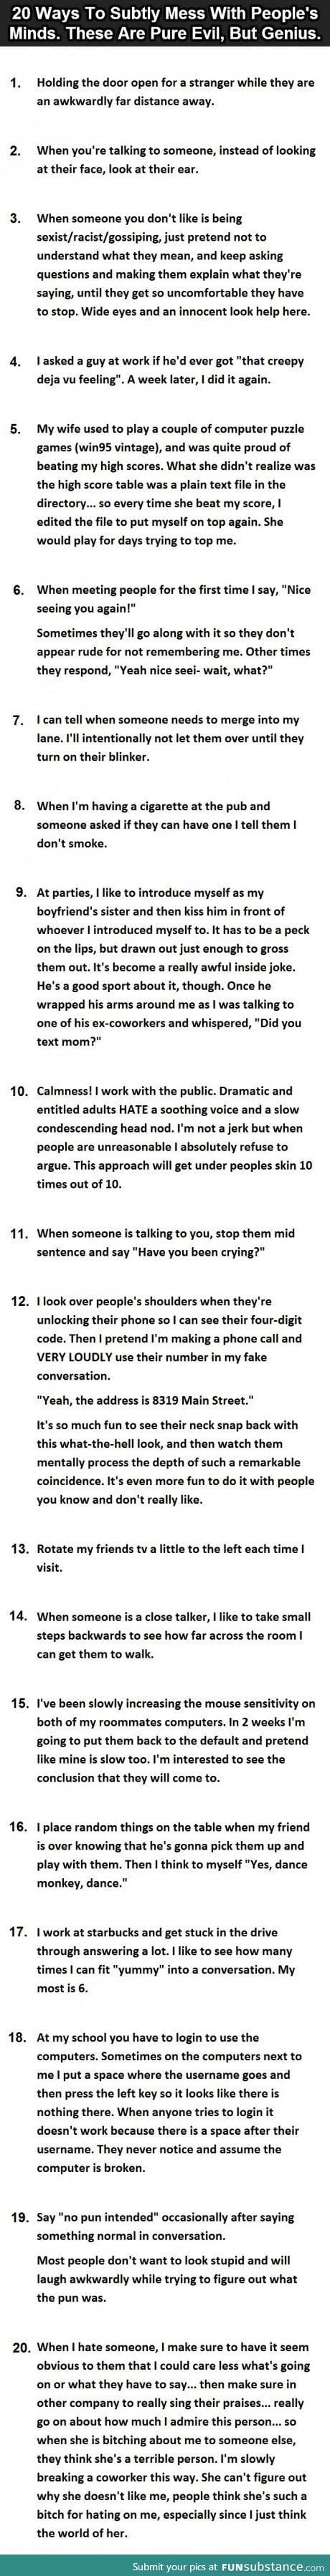 20 ways to mess with people without them knowing